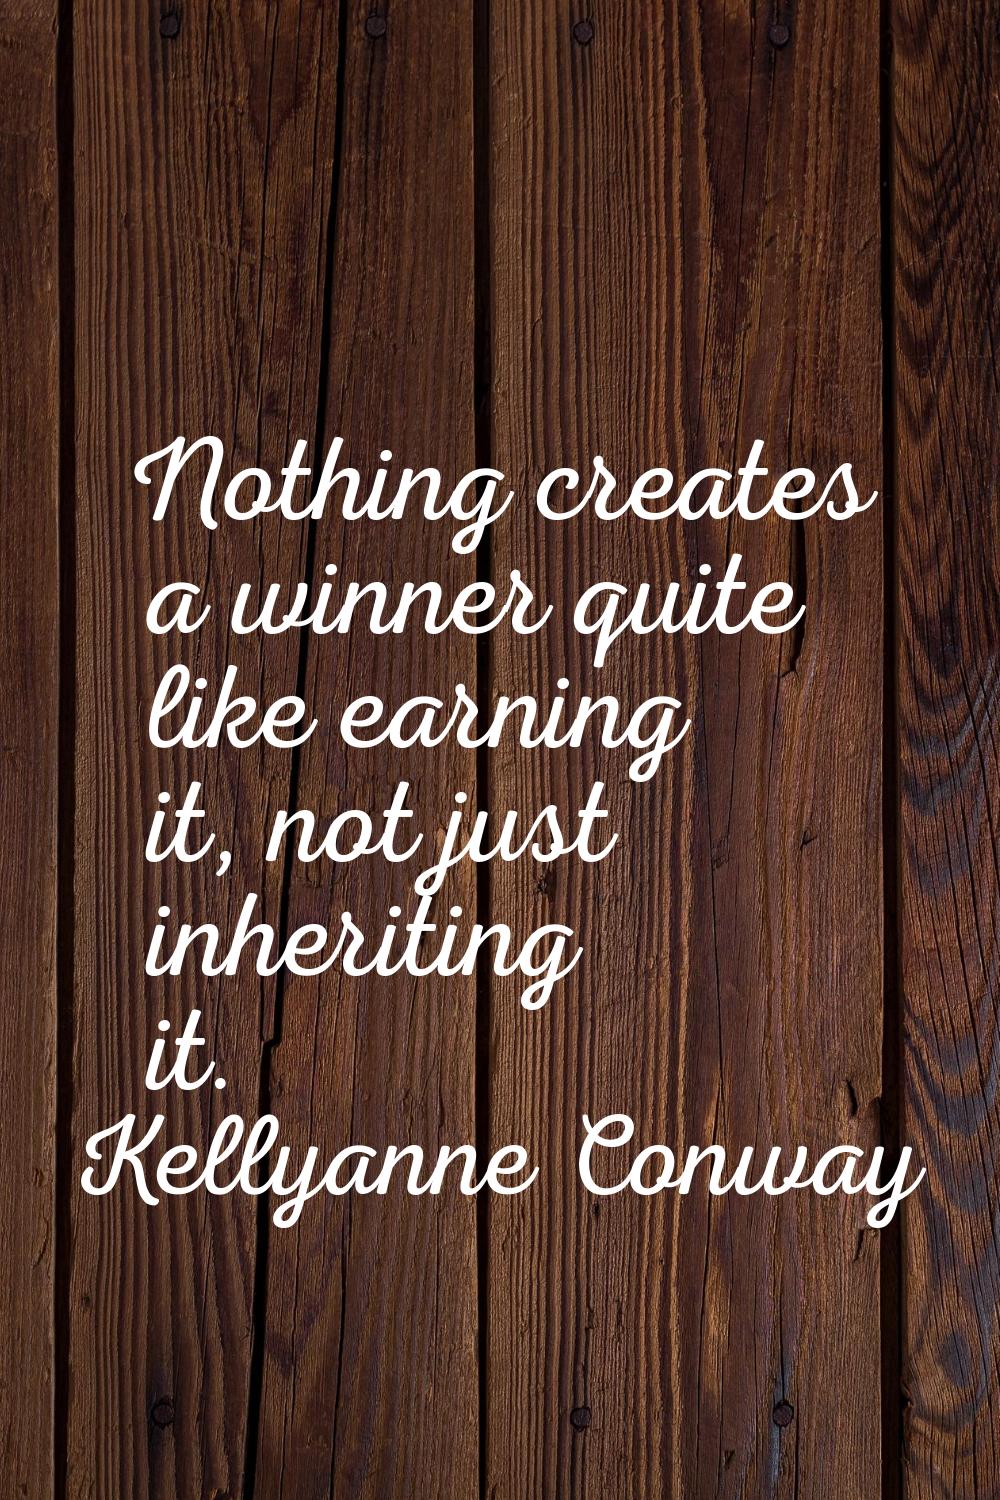 Nothing creates a winner quite like earning it, not just inheriting it.